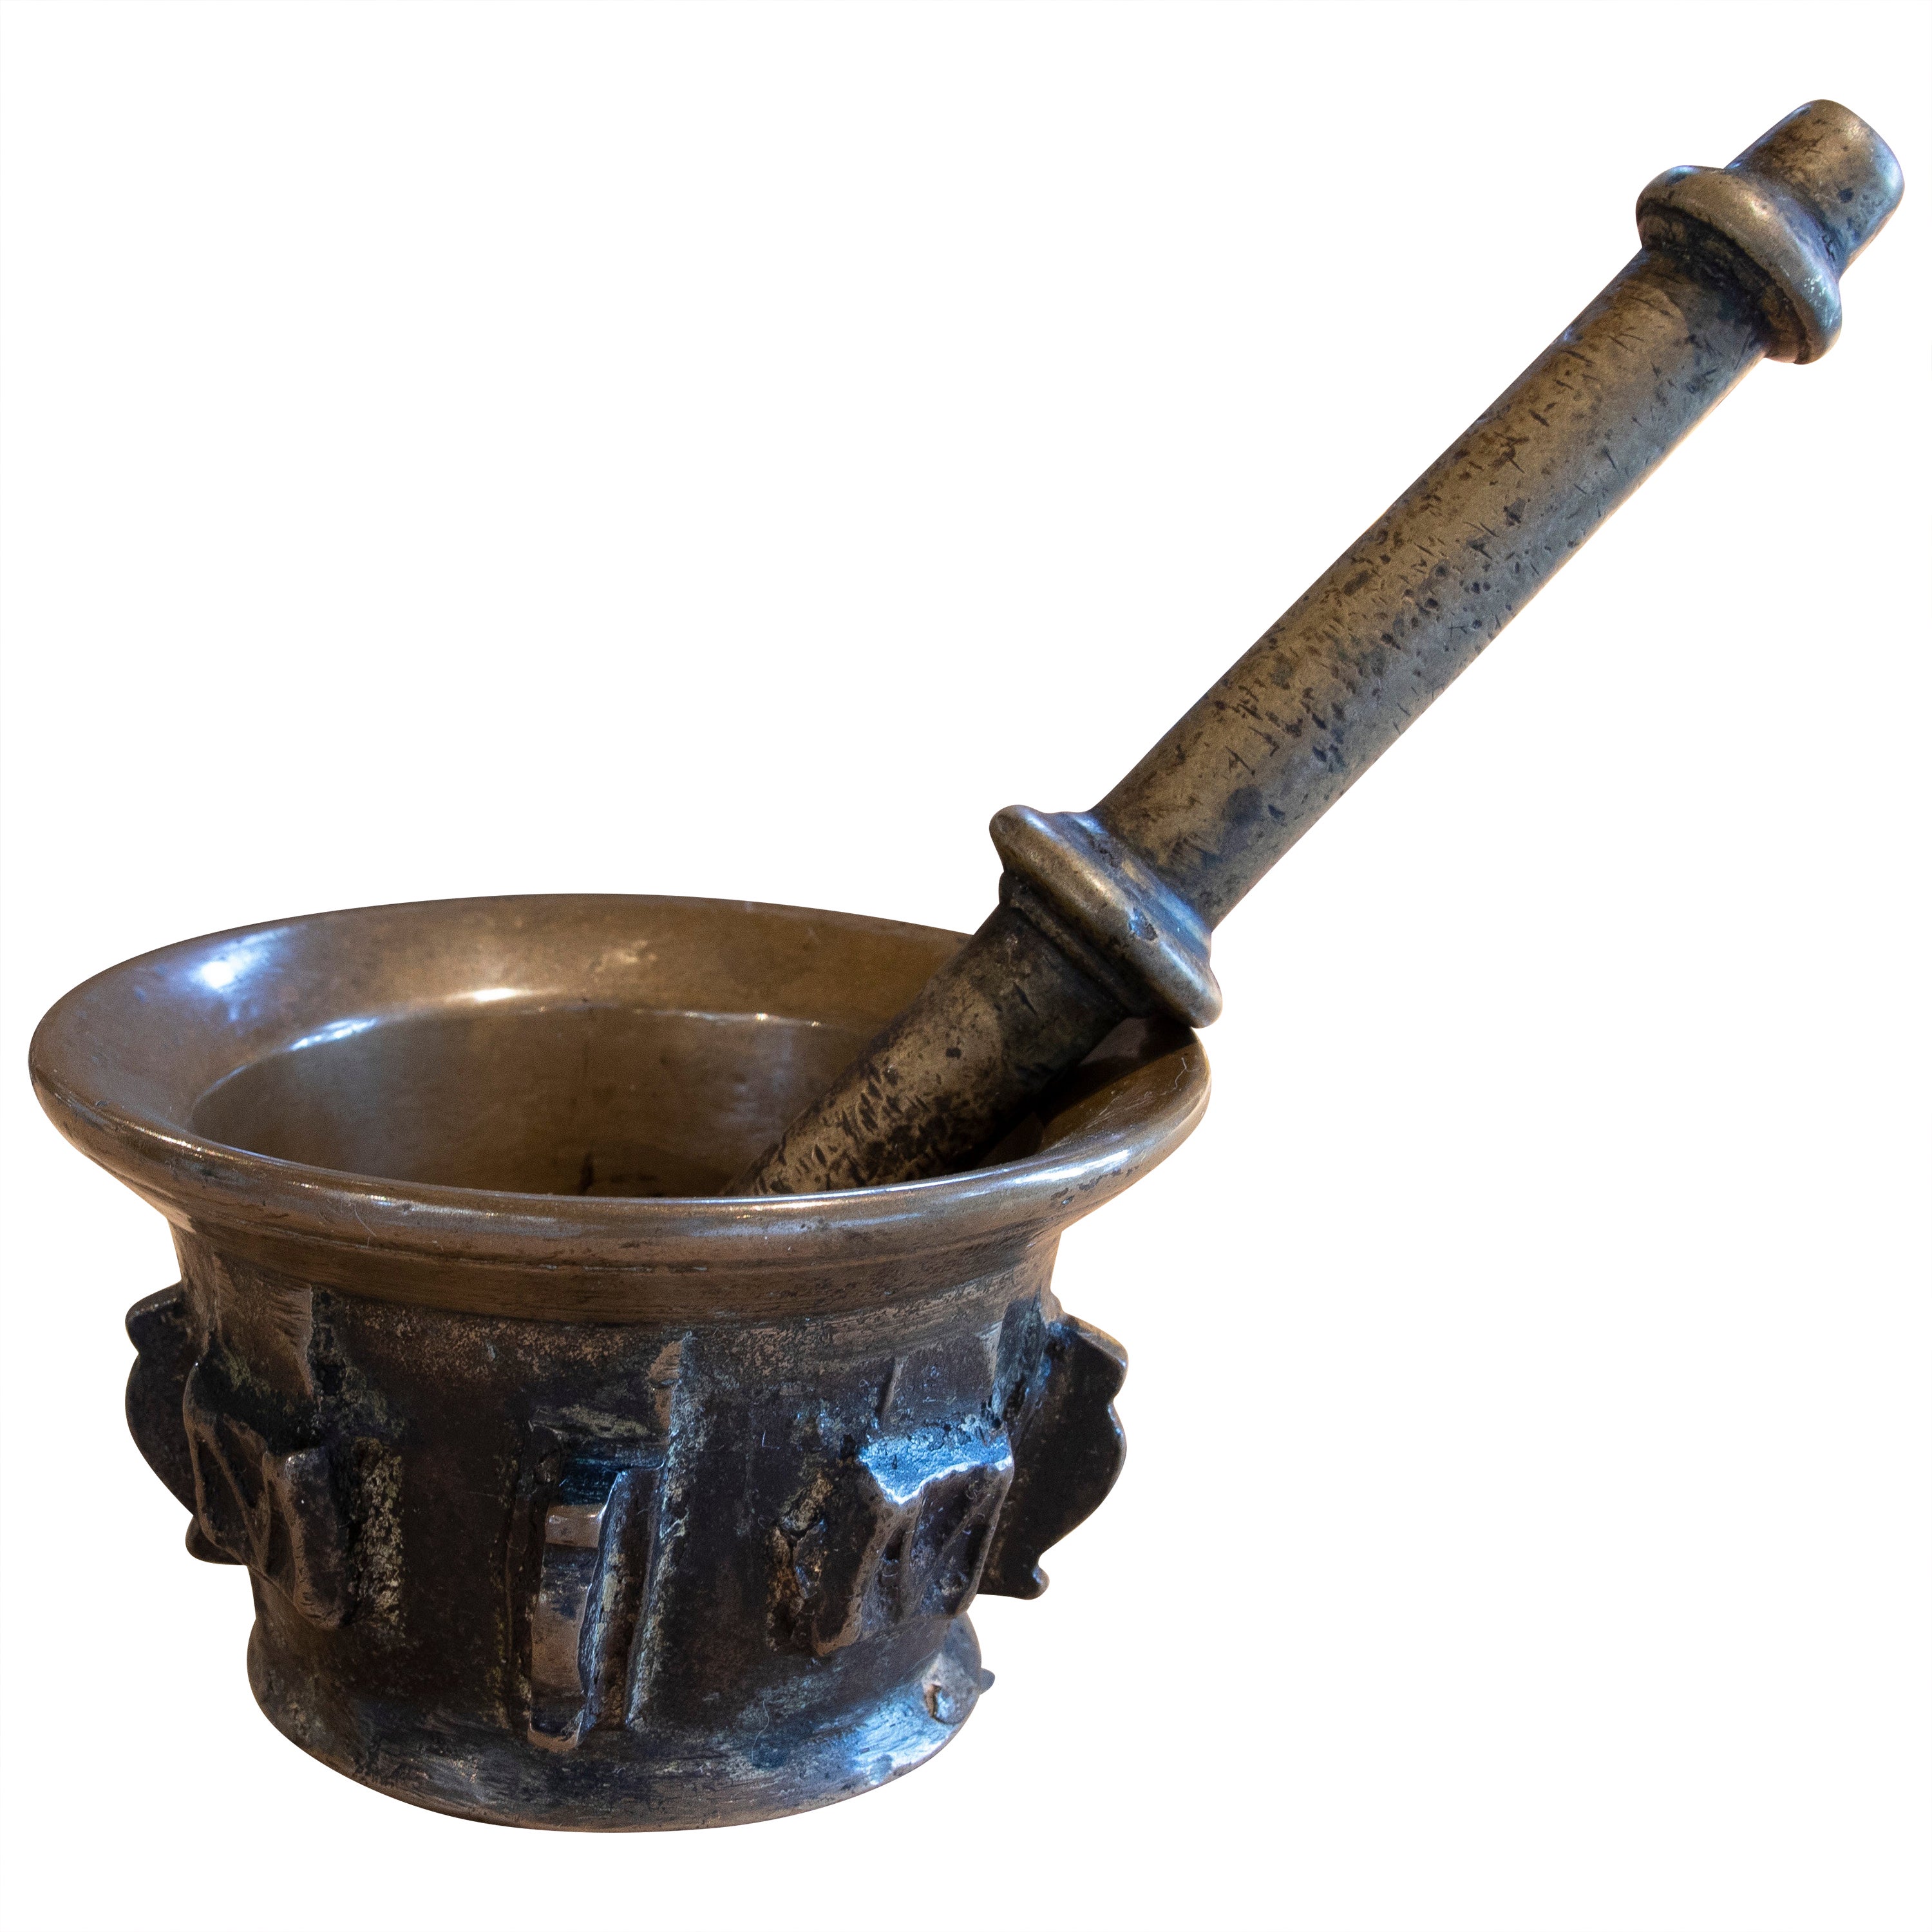 16th century Spanish Bronze Mortar with Letters M on the Sides